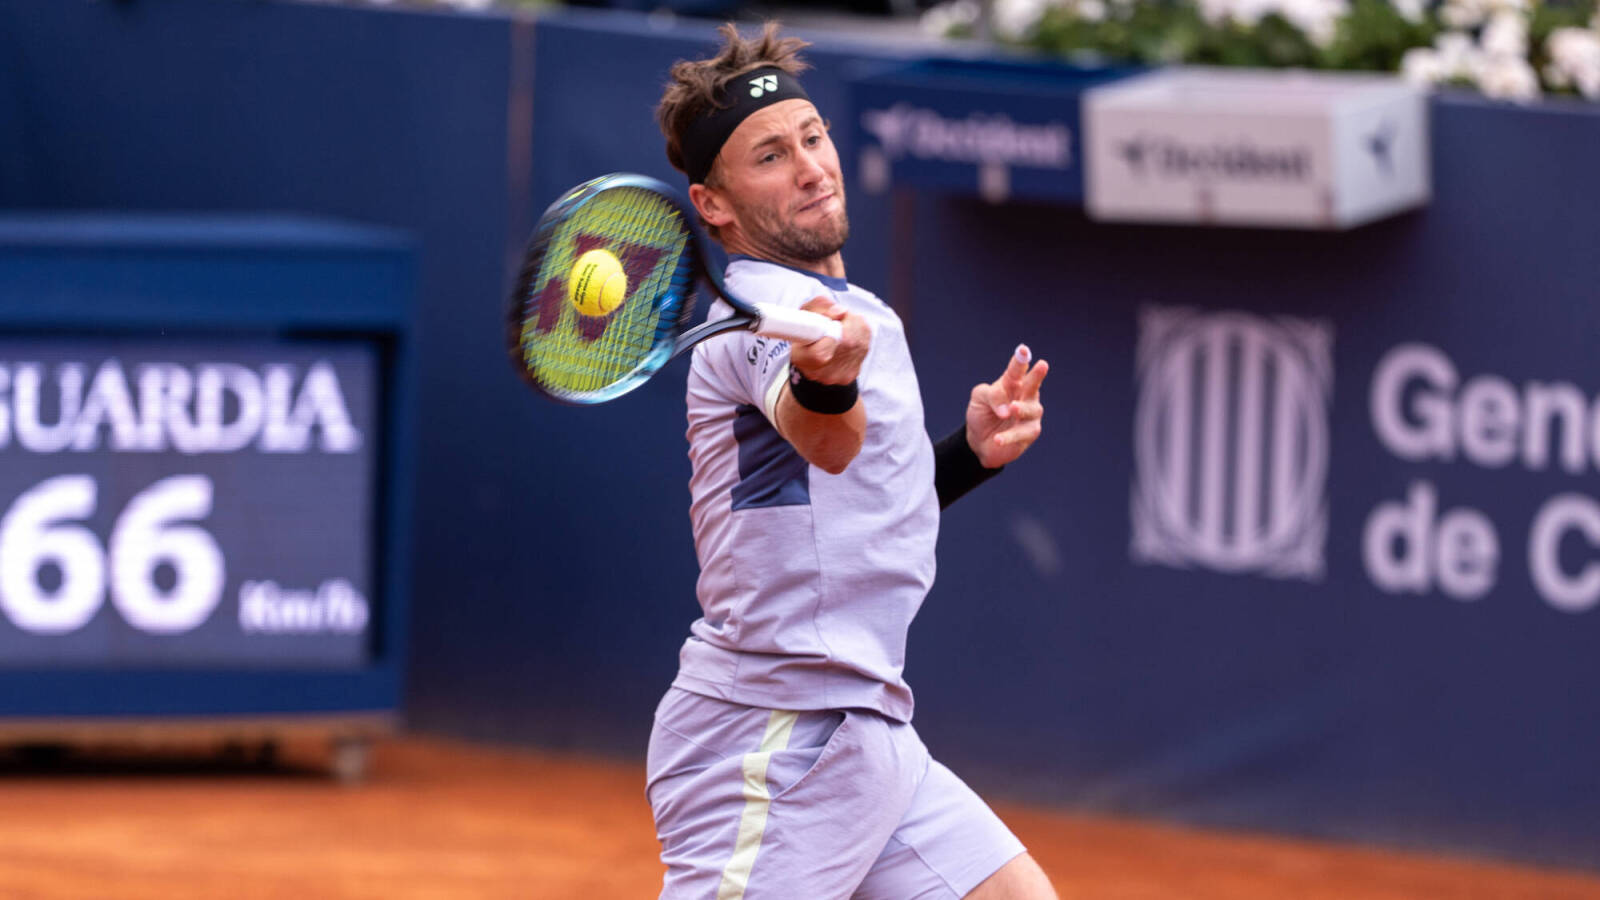 'It wasn’t easy for any of us,' Casper Ruud avenges Monte Carlo Final loss as he defeats Stefanos Tsitsipas to win Barcelona Open